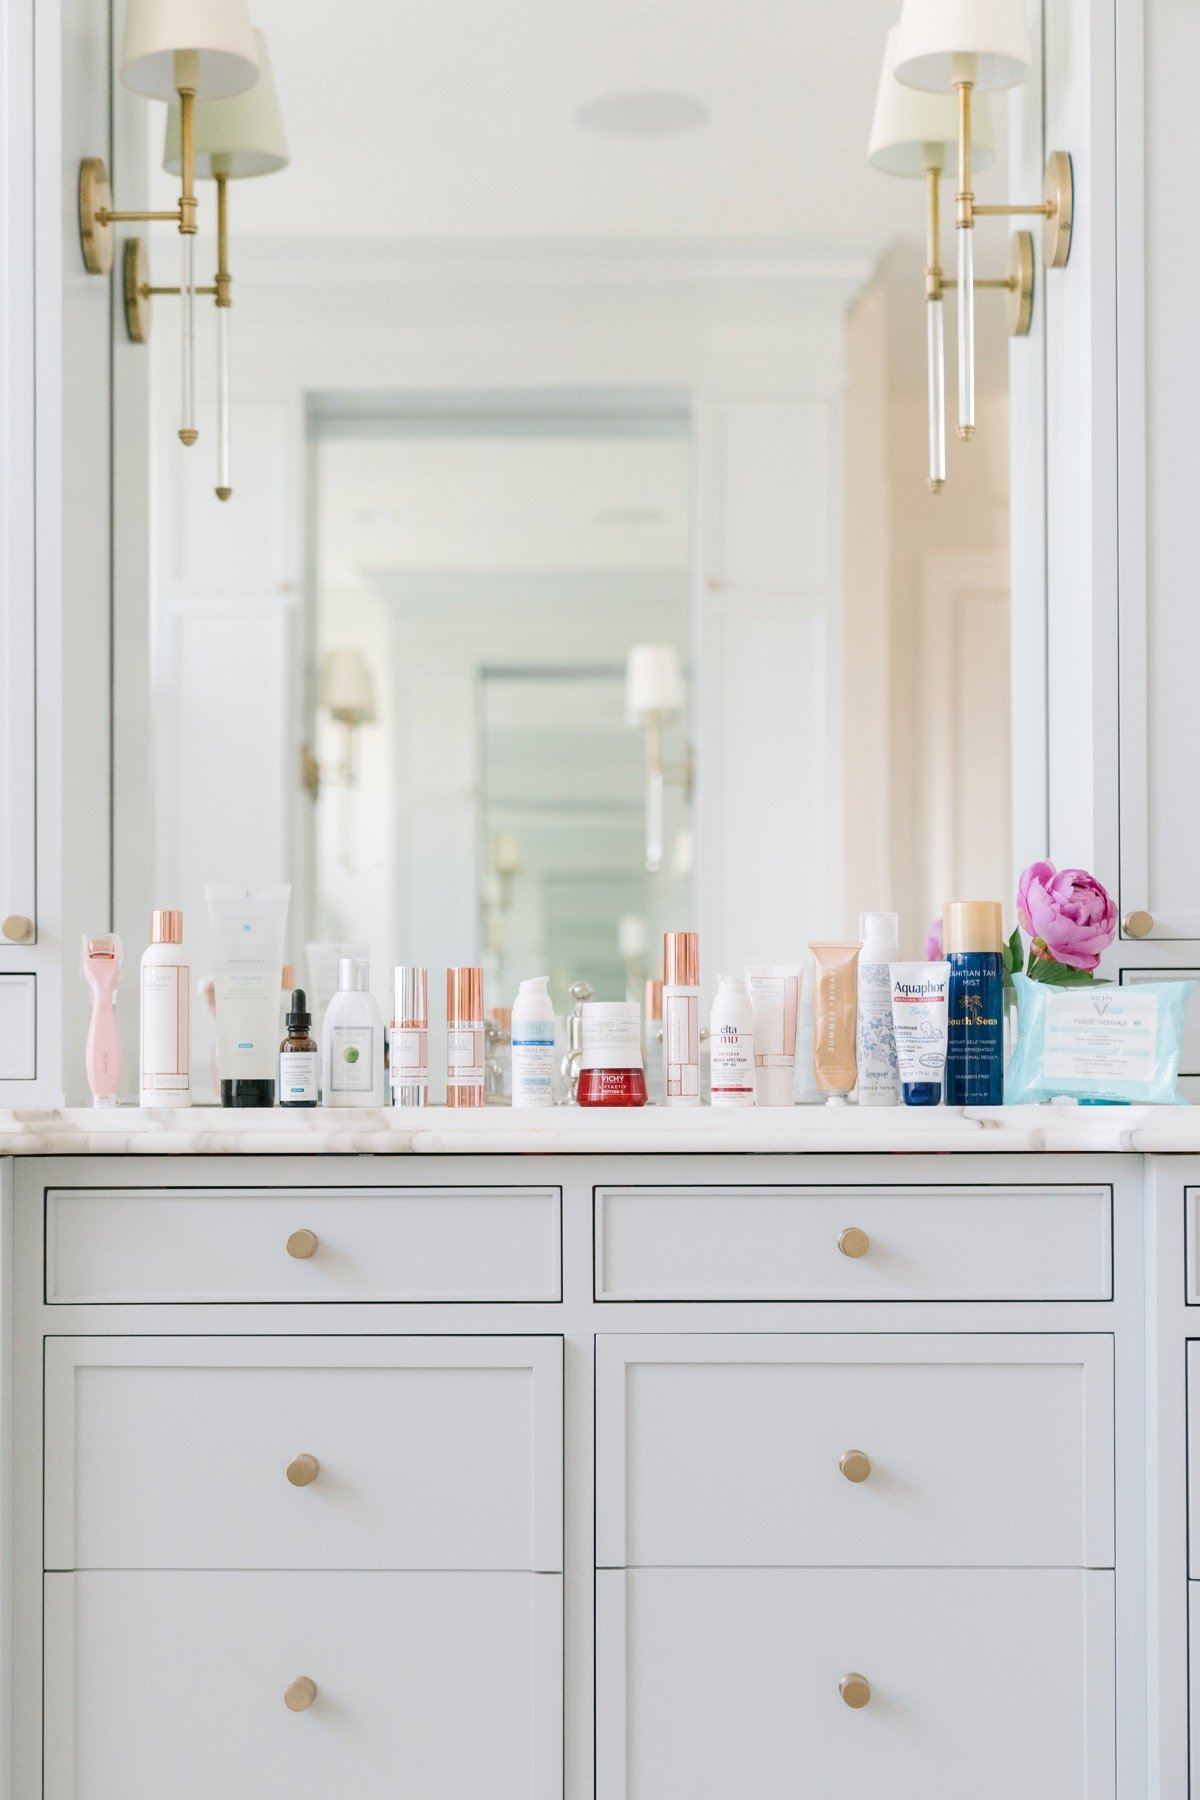 My Five Step AM and PM Beauty Routine...